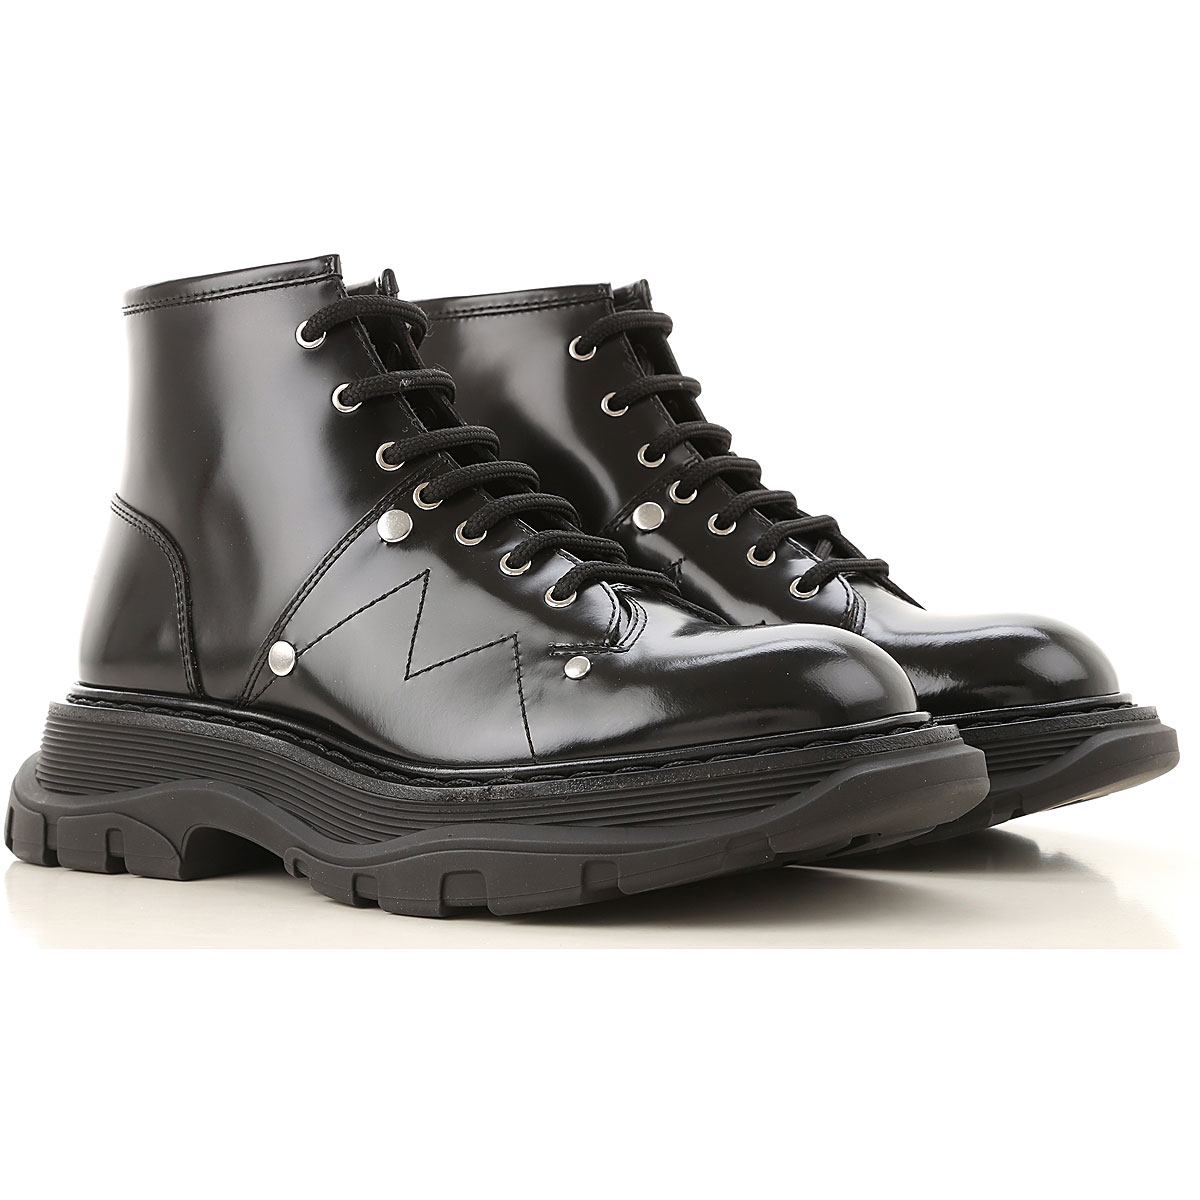 Womens Shoes Alexander McQueen, Style code: 595469-whqsg-1081